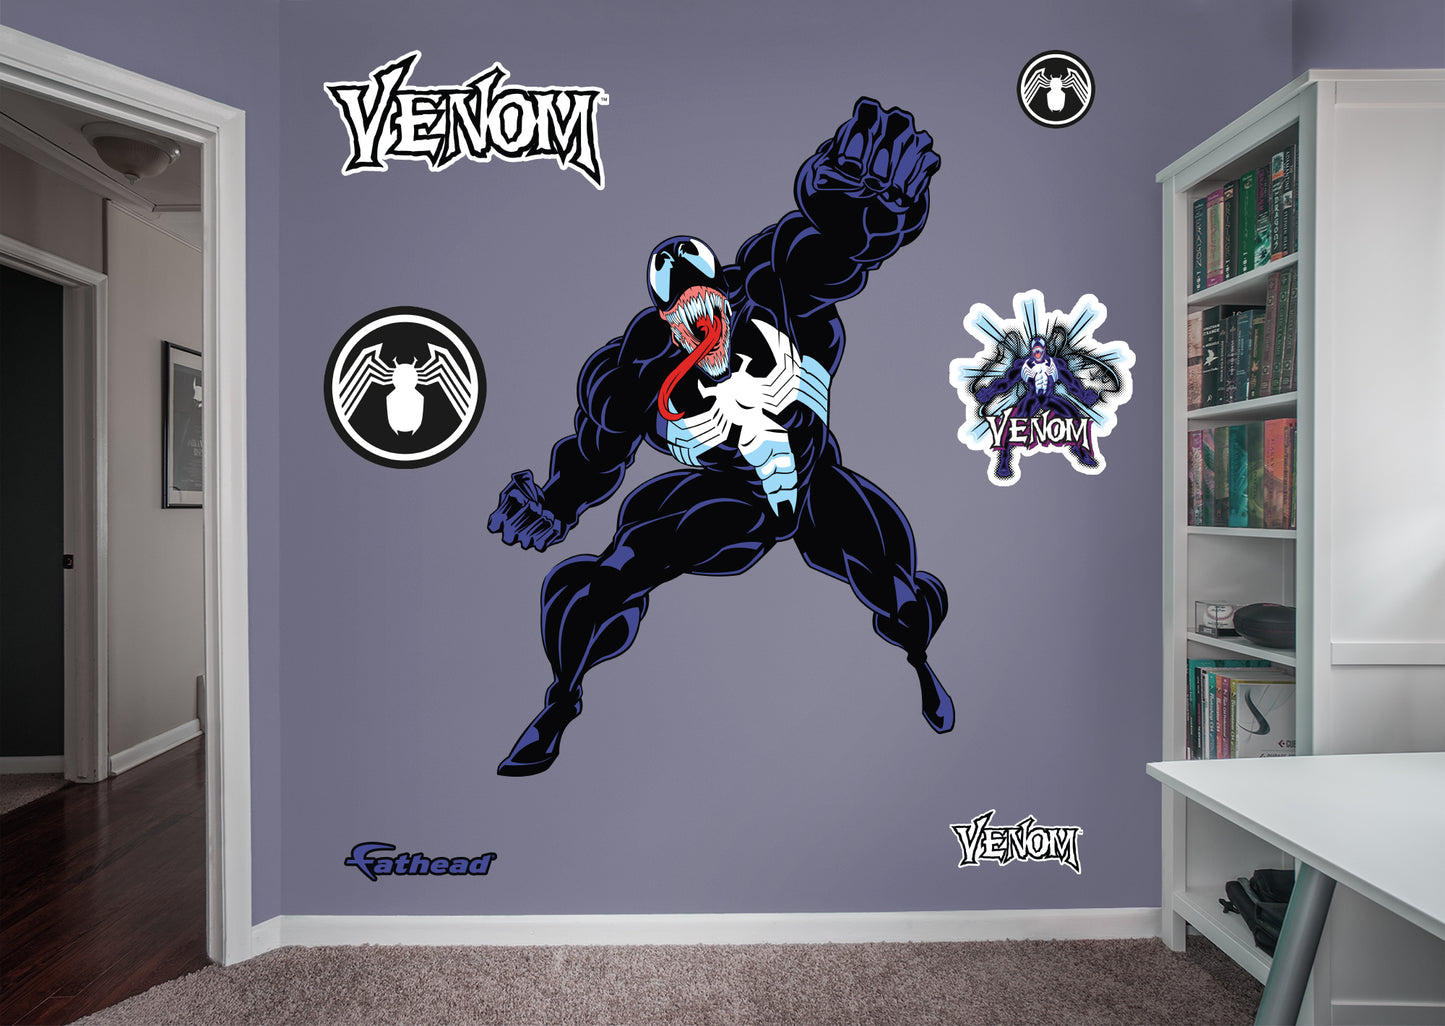 Venom: Venom High Render RealBig - Officially Licensed Marvel Removable Adhesive Decal